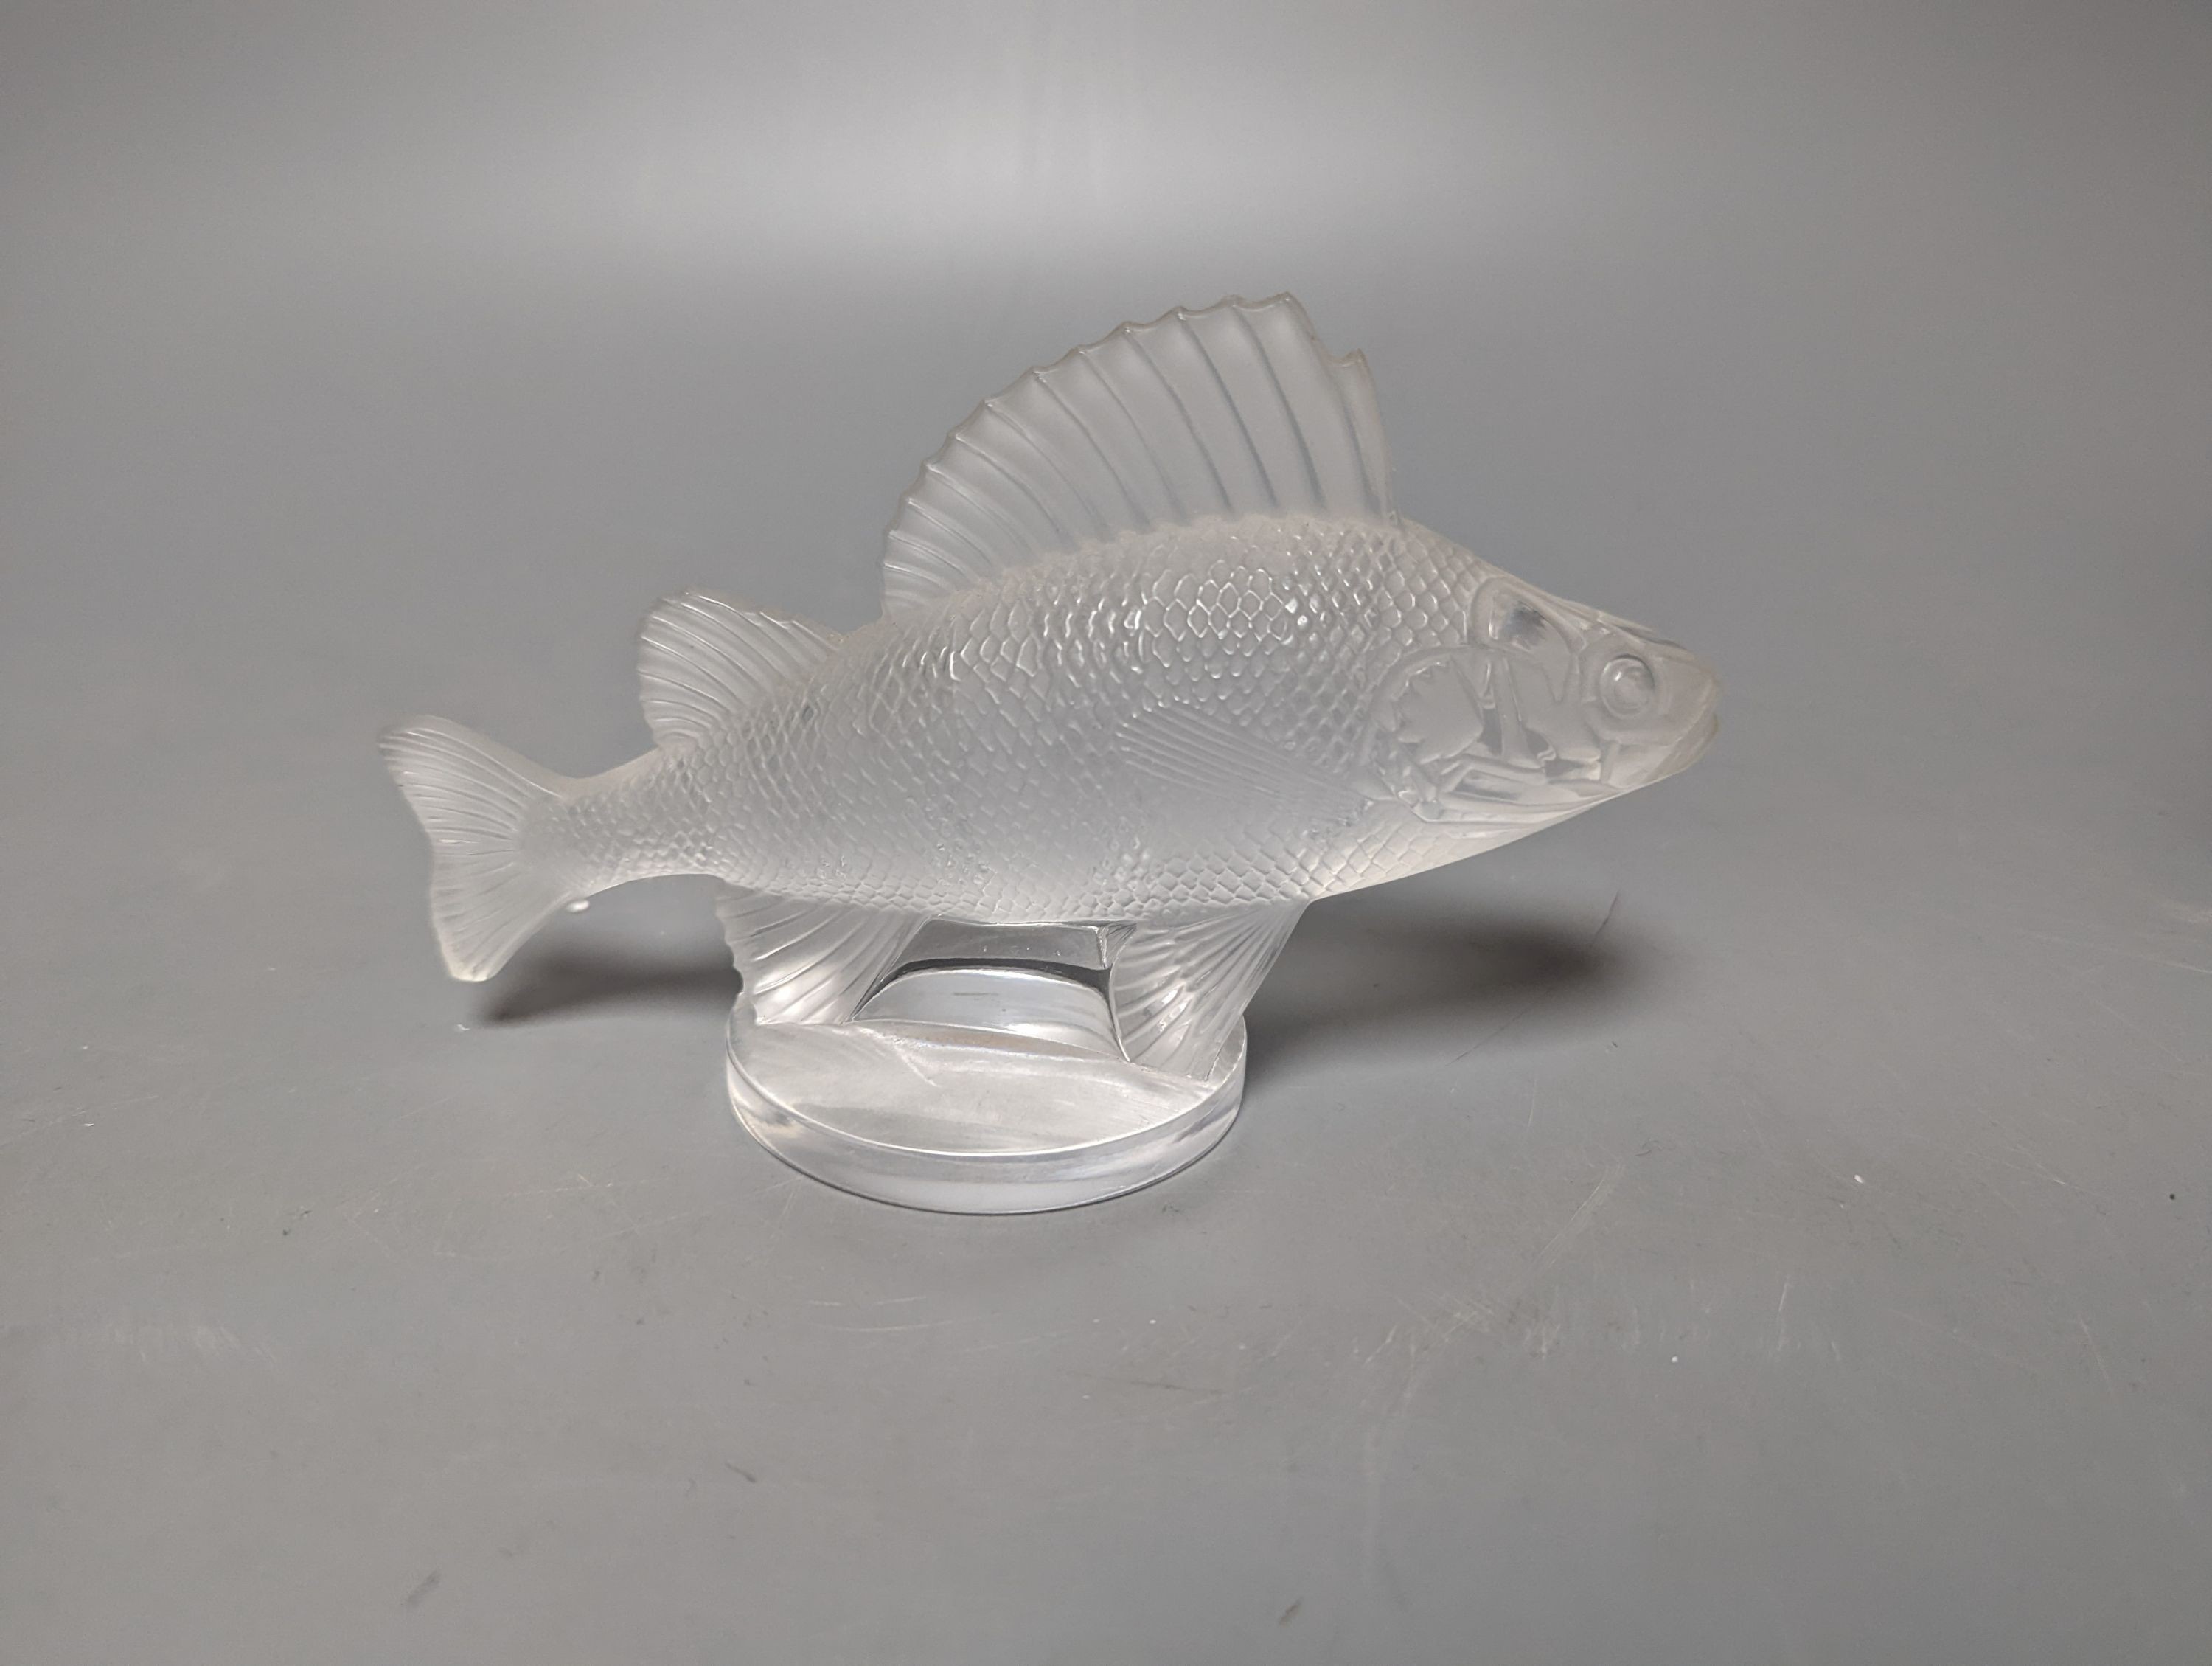 A Lalique clear and frosted glass Perche Poisson / Perch Fish car mascot, engraved mark Lalique France, 6cm long